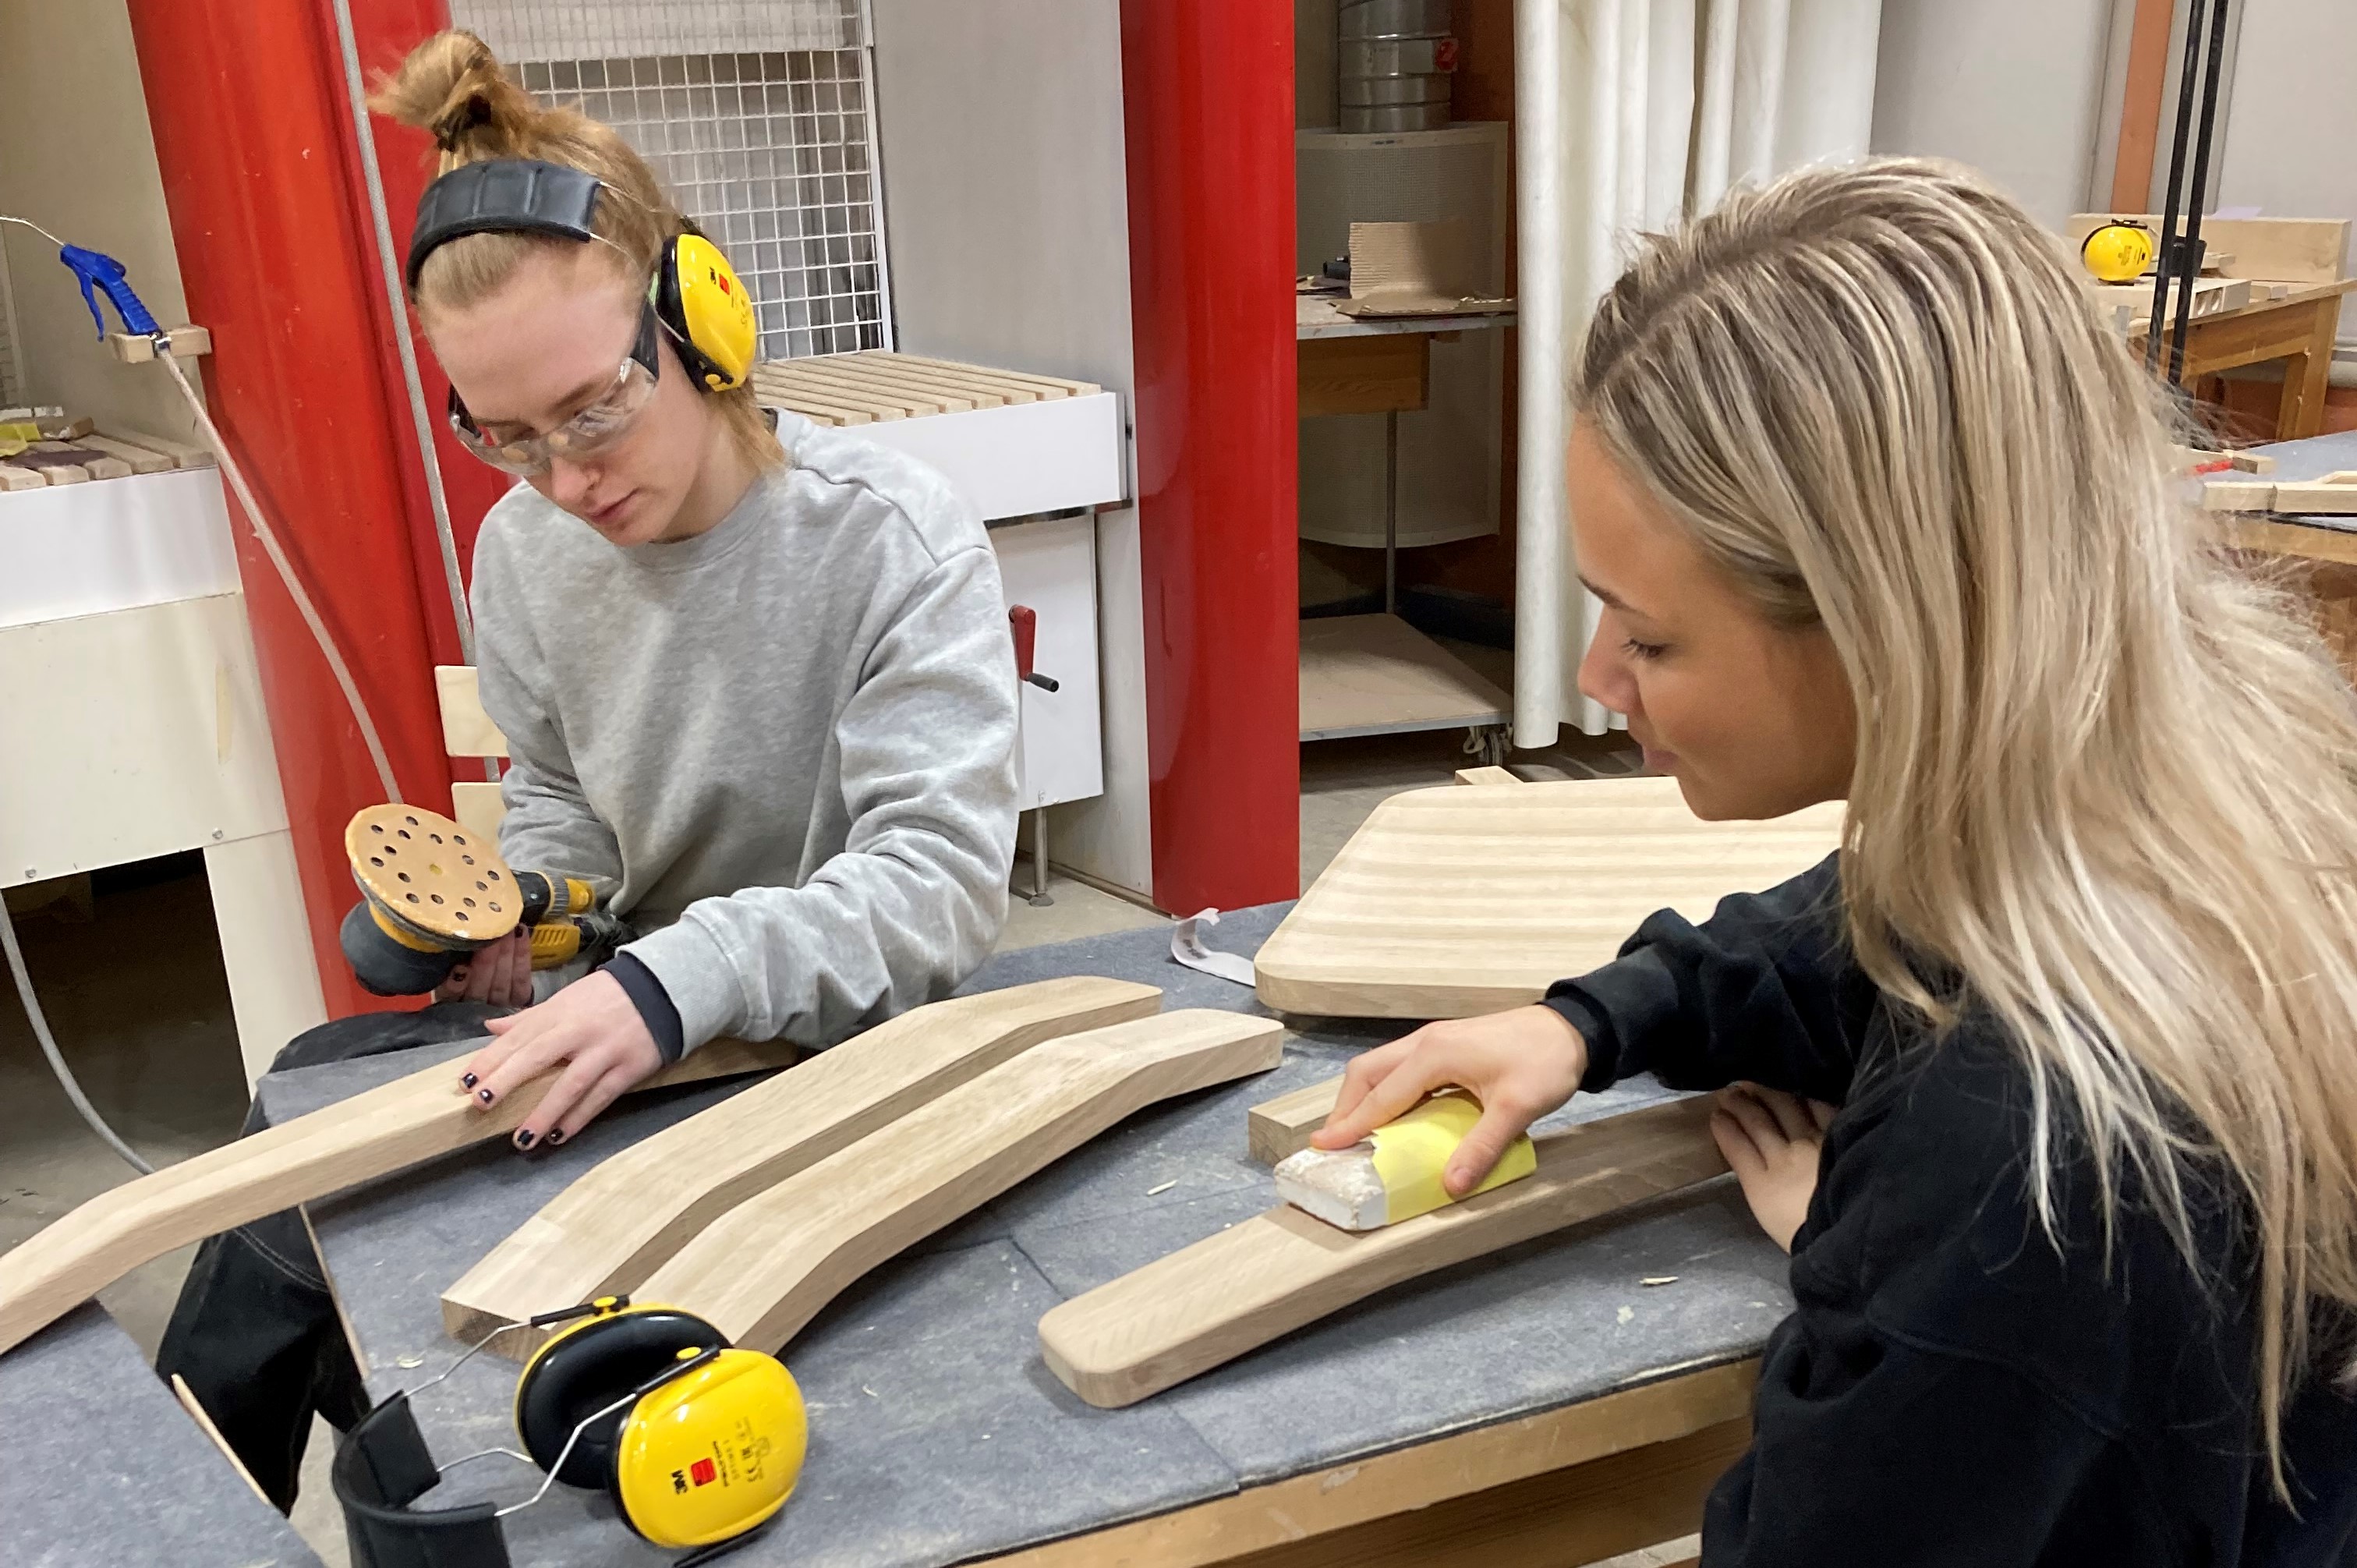 Students at the Product Development with Furniture Design programme at the School of Engineering, Jönköping University.